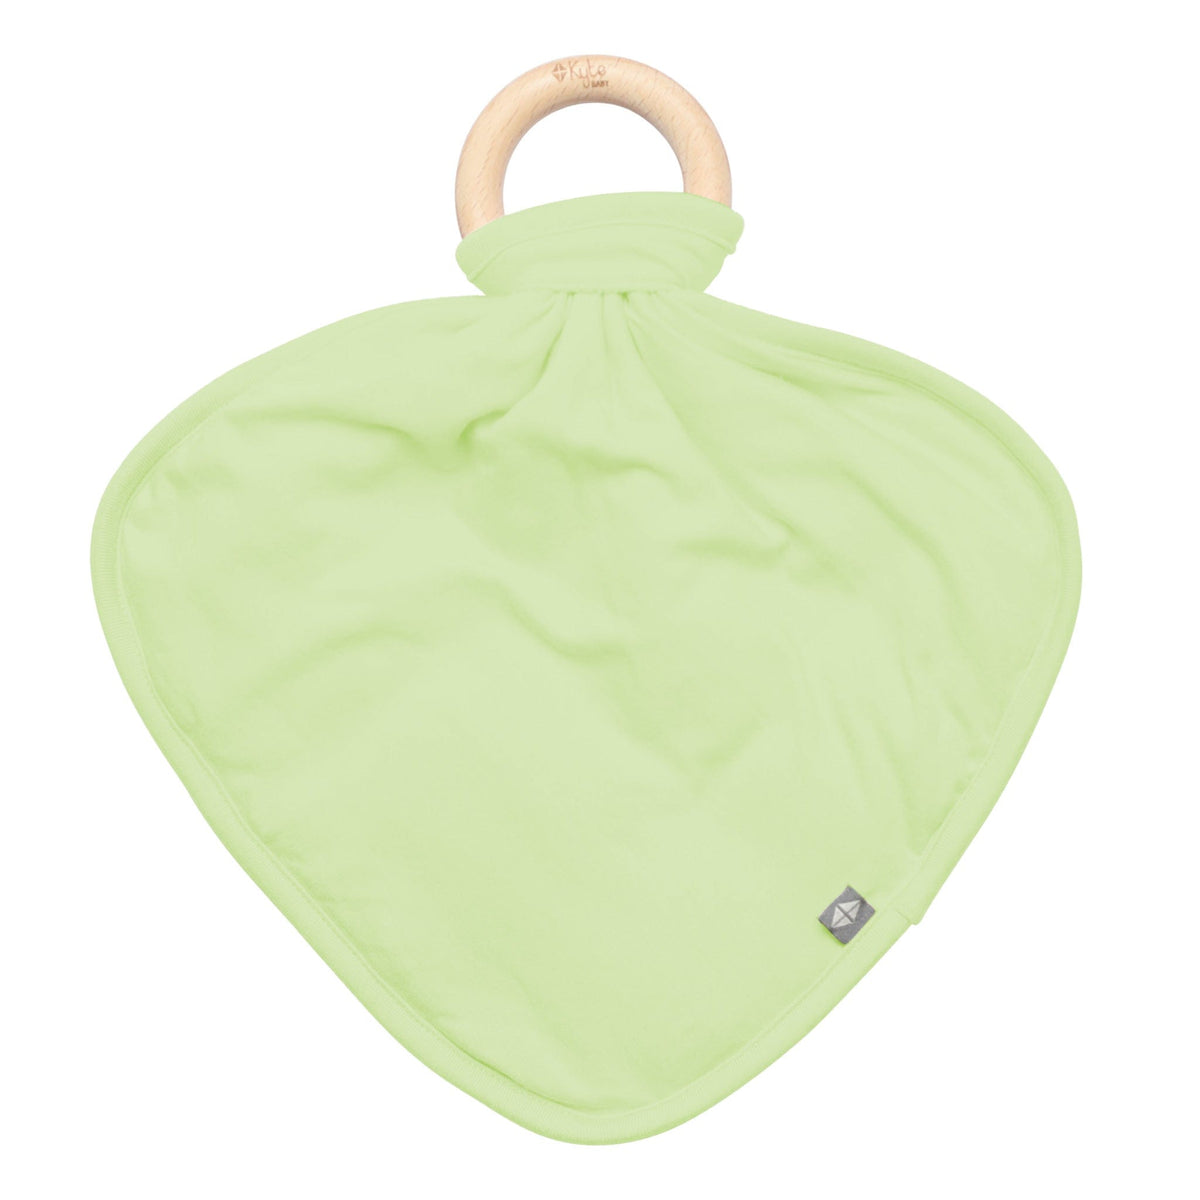 Kyte BABY Lovey Pistachio / Infant Lovey in Pistachio with Removable Teething Ring